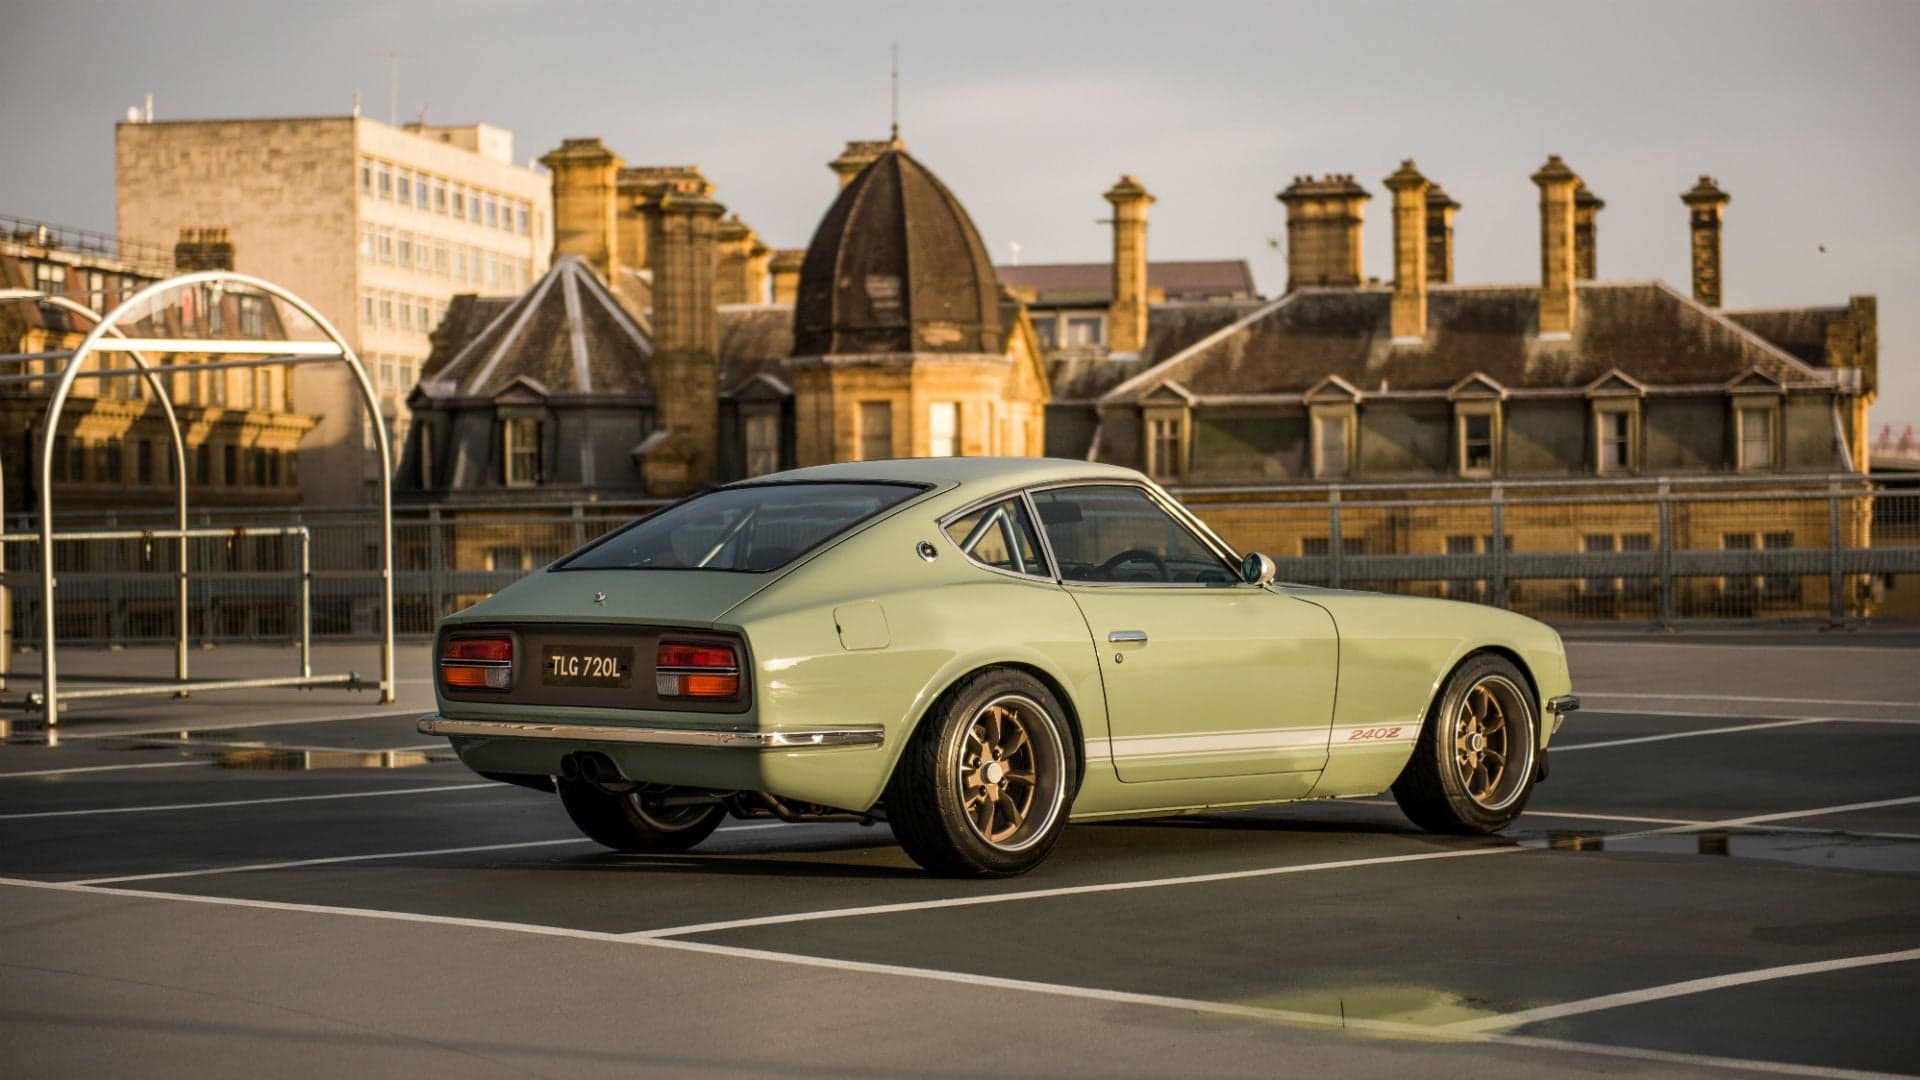 This British Restoration Company Is Building Bespoke, Reimagined Datsun 240Zs